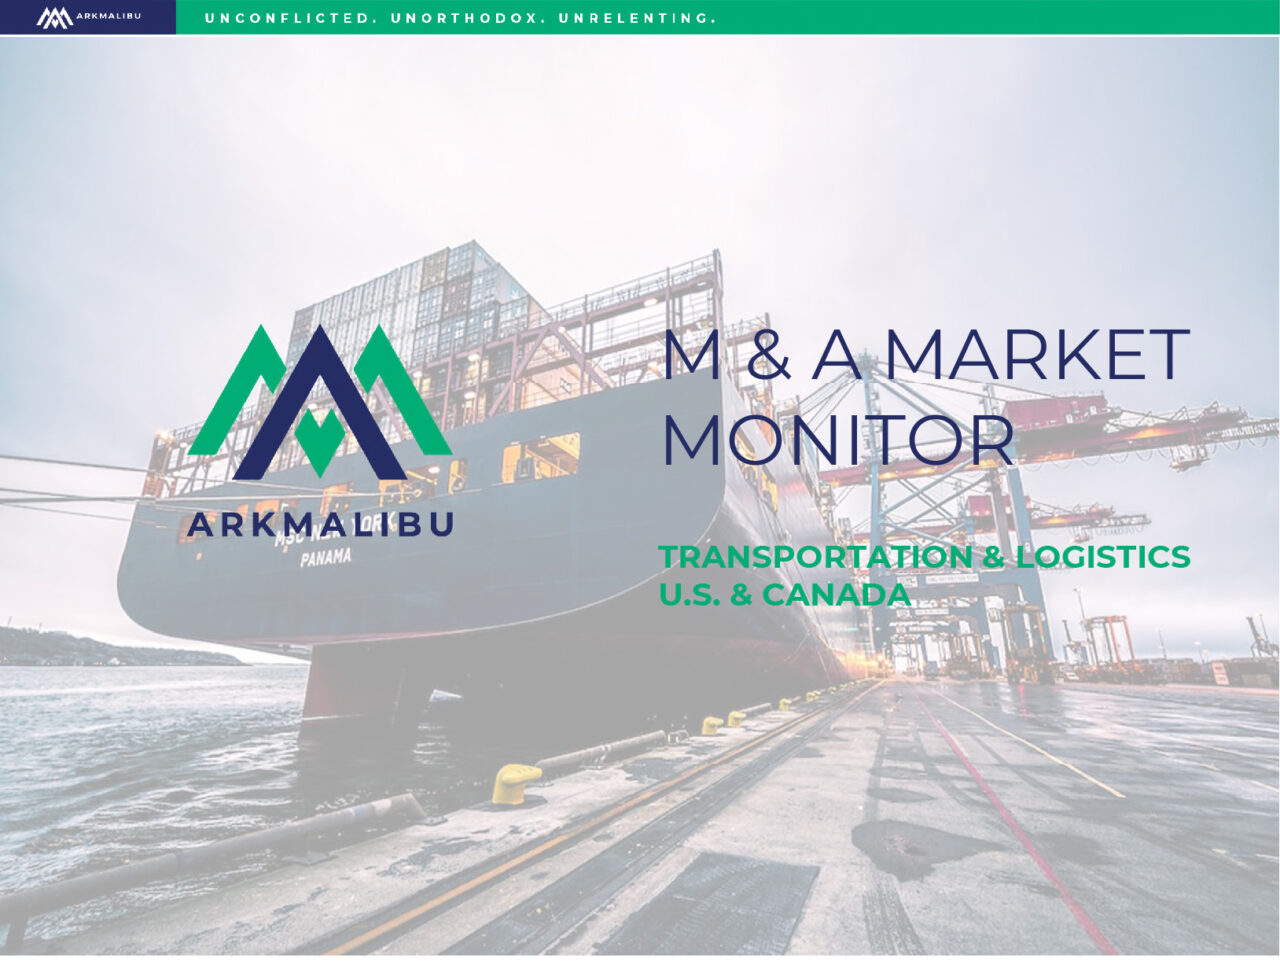 Market Monitor Cover for Transportation. Faded Image of a large ship filled with shipping containers in the background